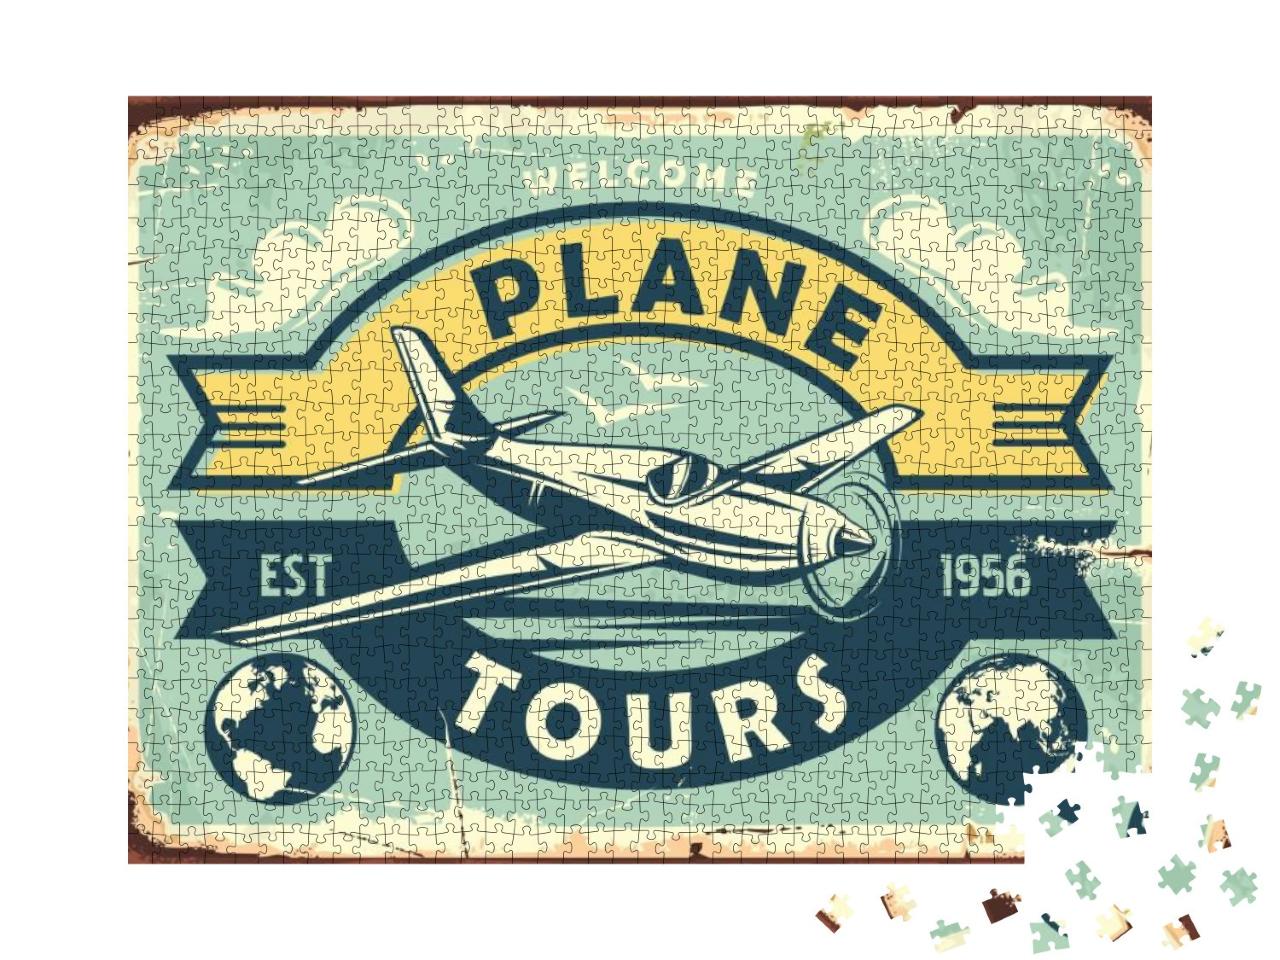 Air Transport Vintage Metal Sign with Airplane, Clouds &... Jigsaw Puzzle with 1000 pieces